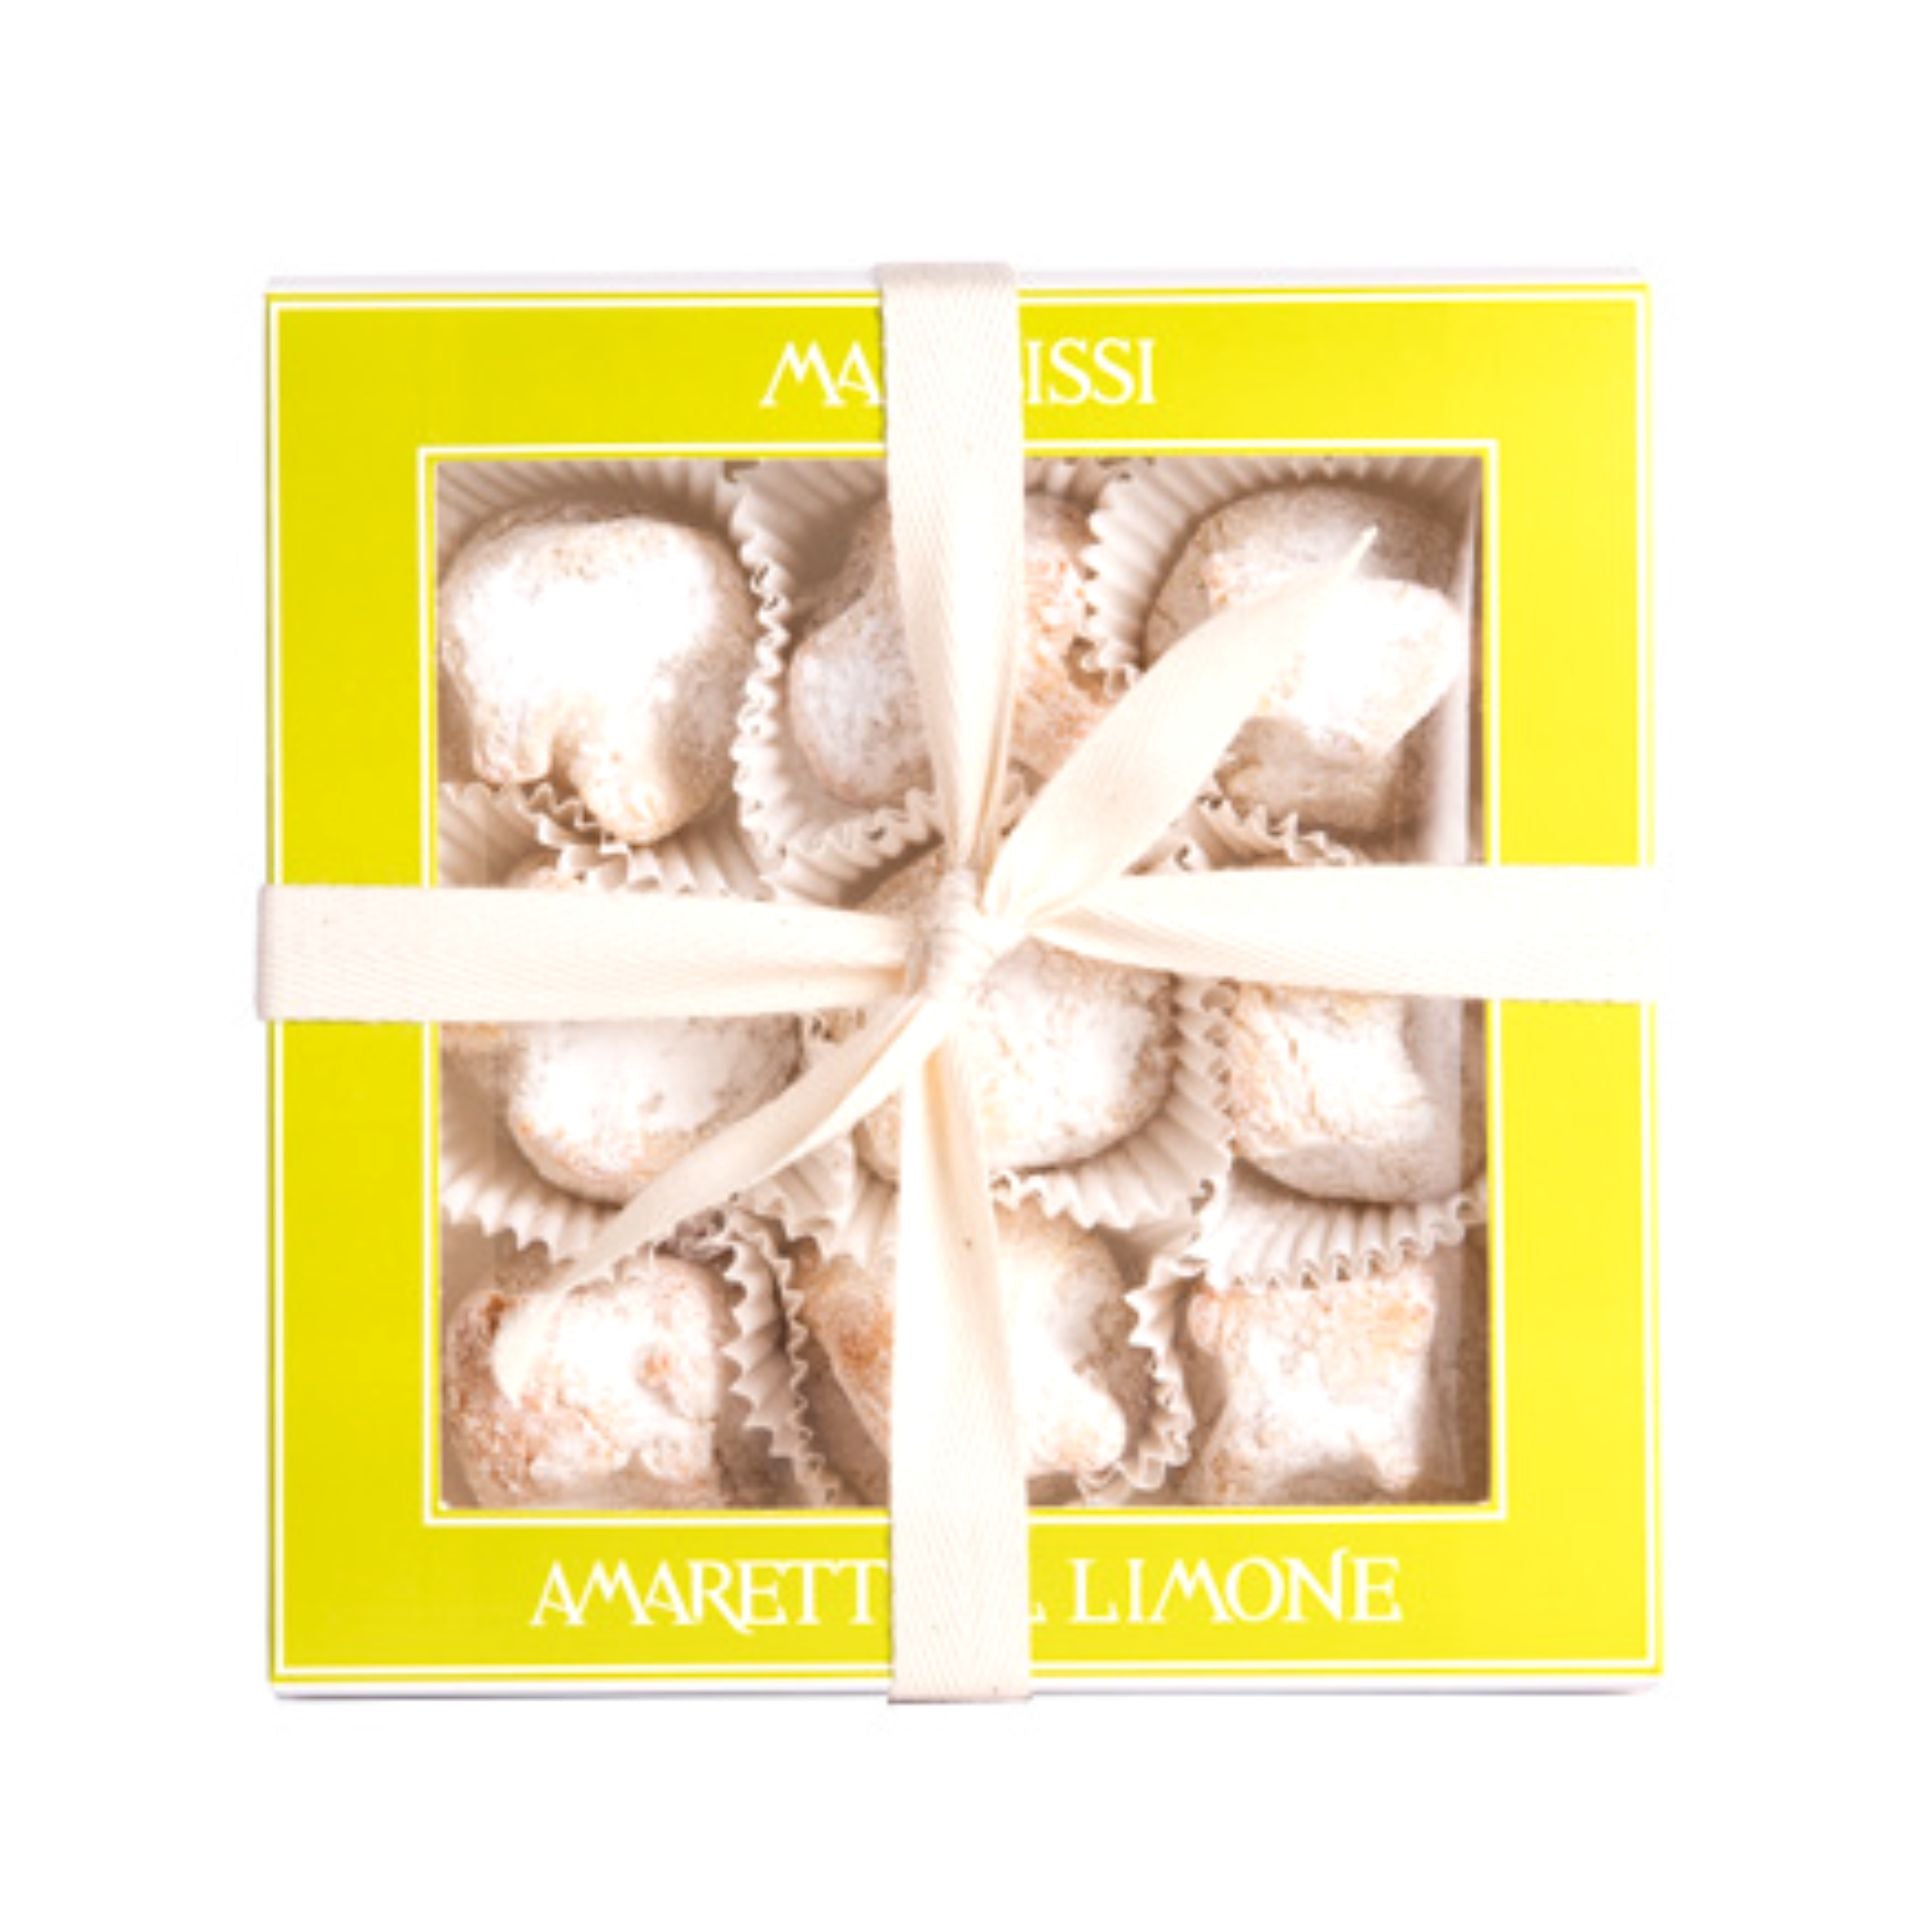 Marabissi Soft Lemon Amaretti (Box) 190g  | Imported and distributed in the UK by Just Gourmet Foods